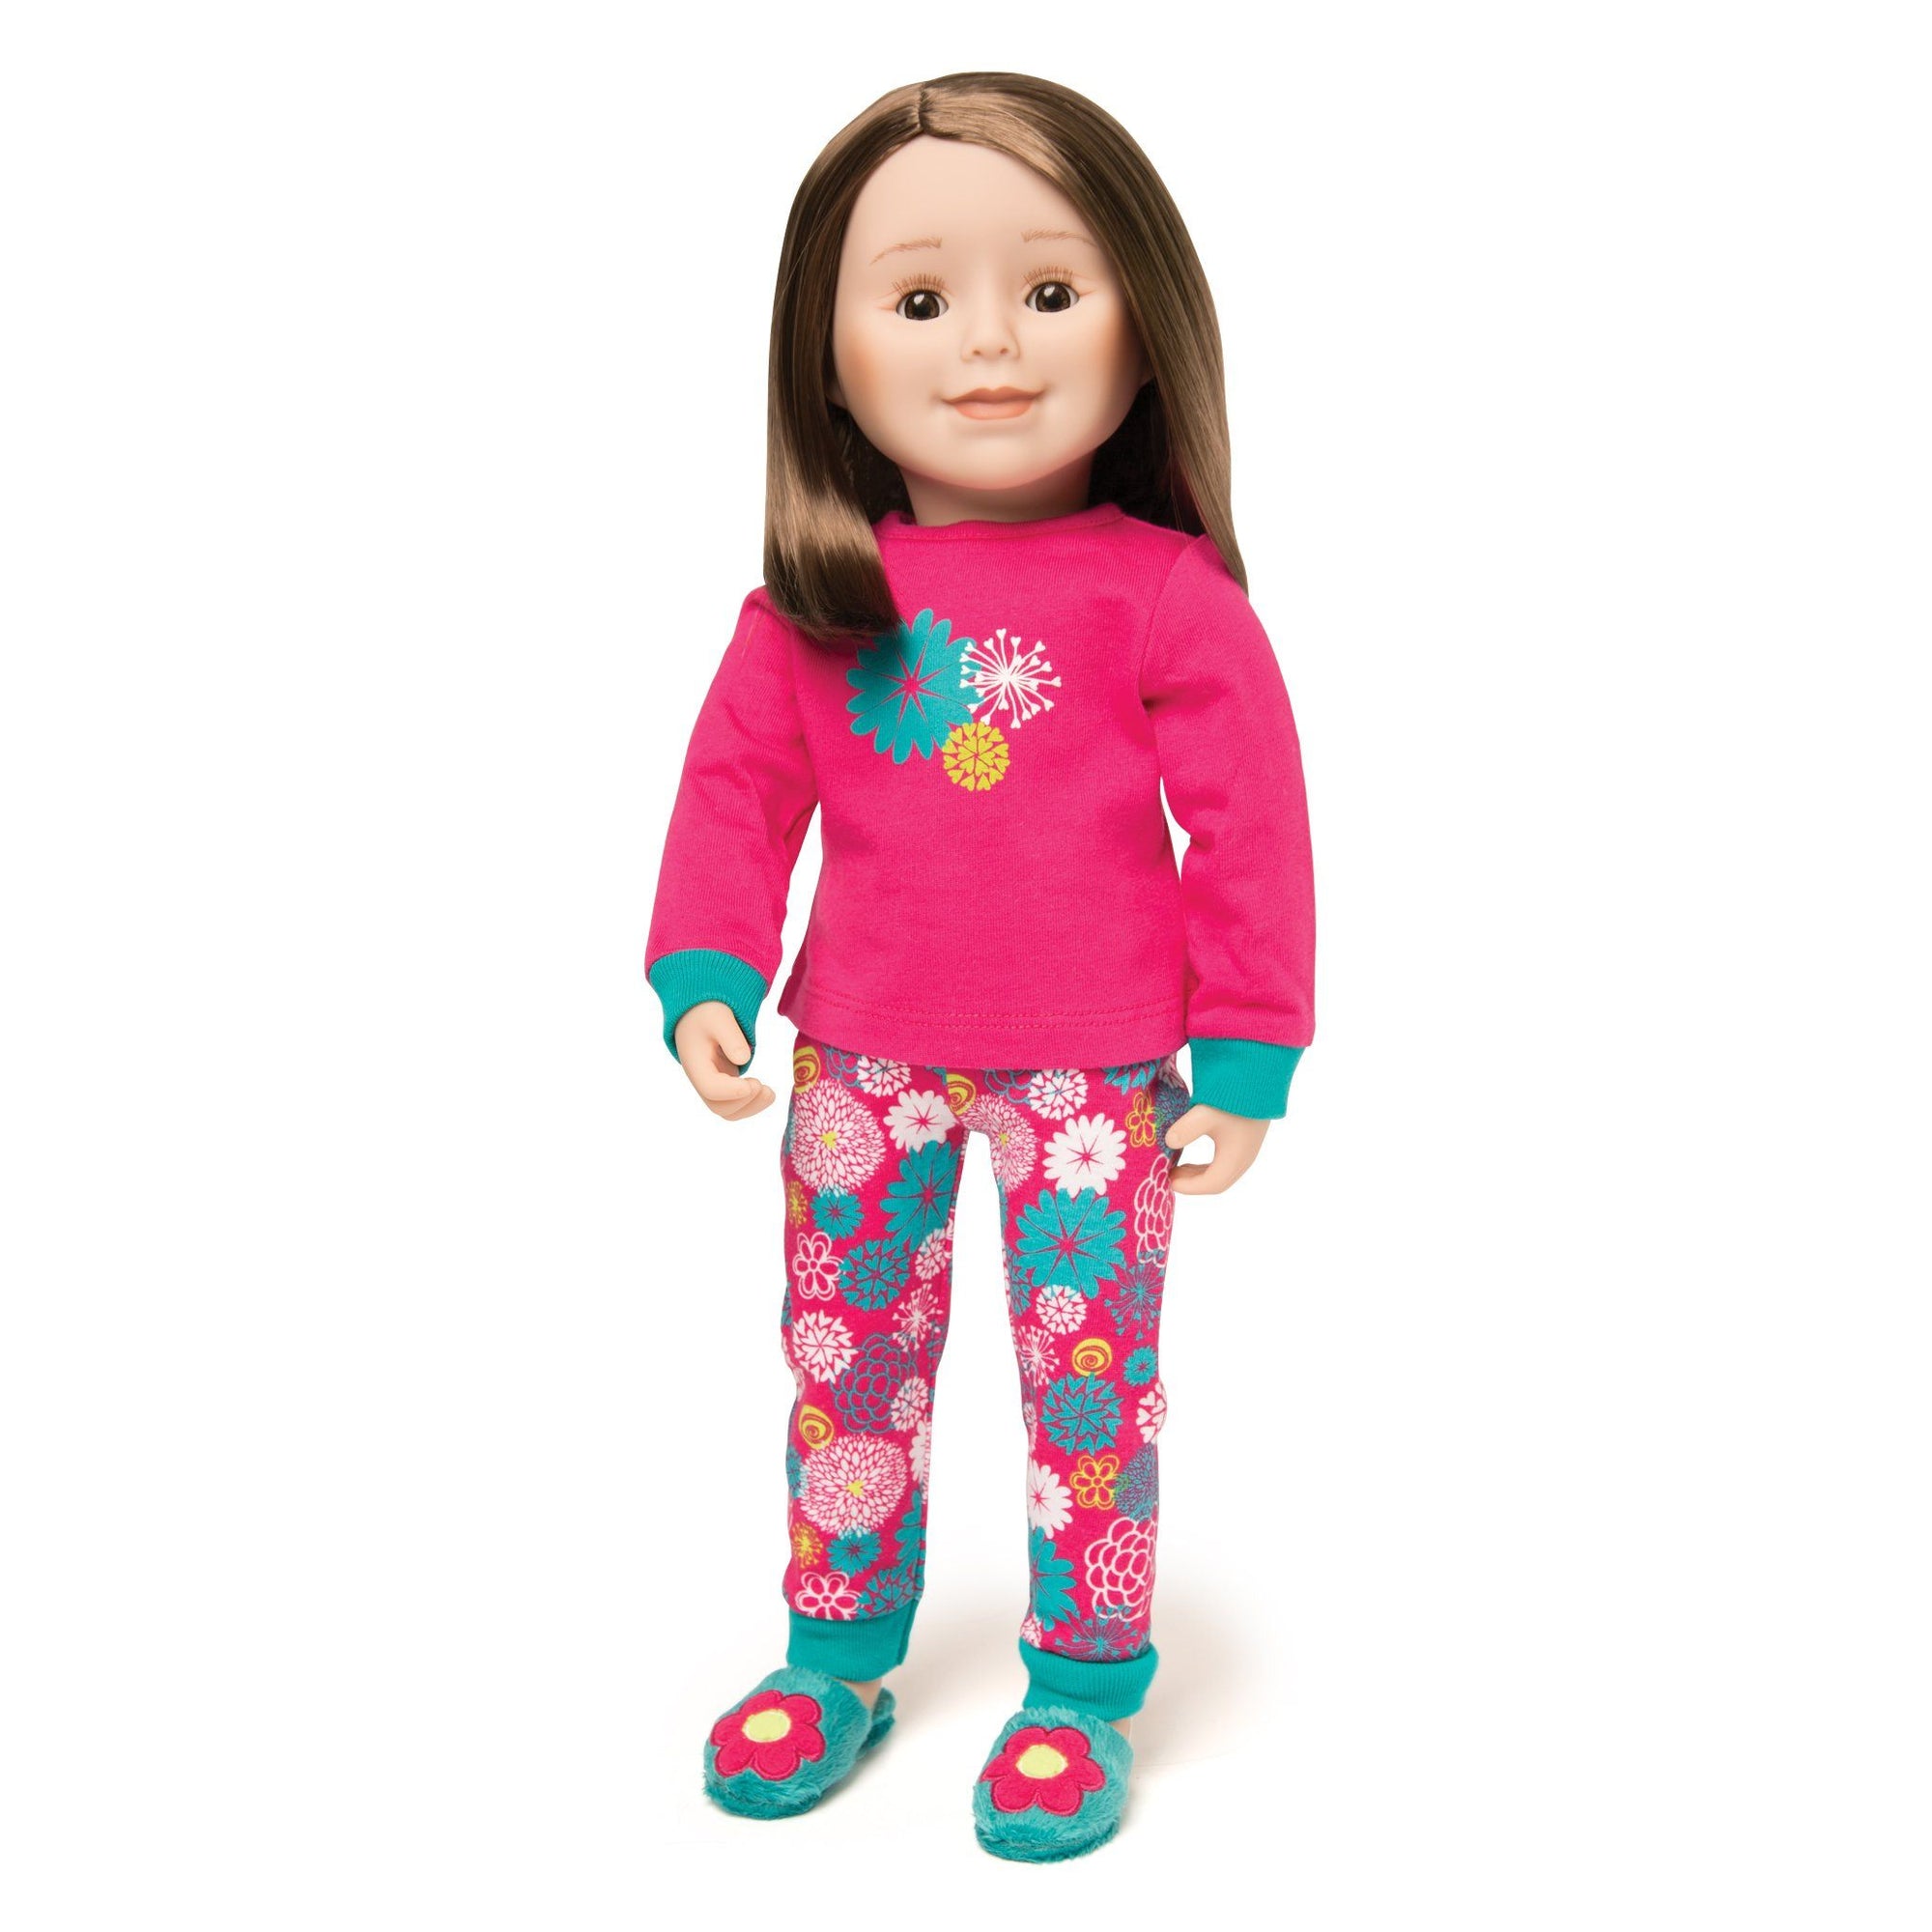 Matching pajamas for doll and girl.  Pink and teal PJs shown on 18 inch doll.